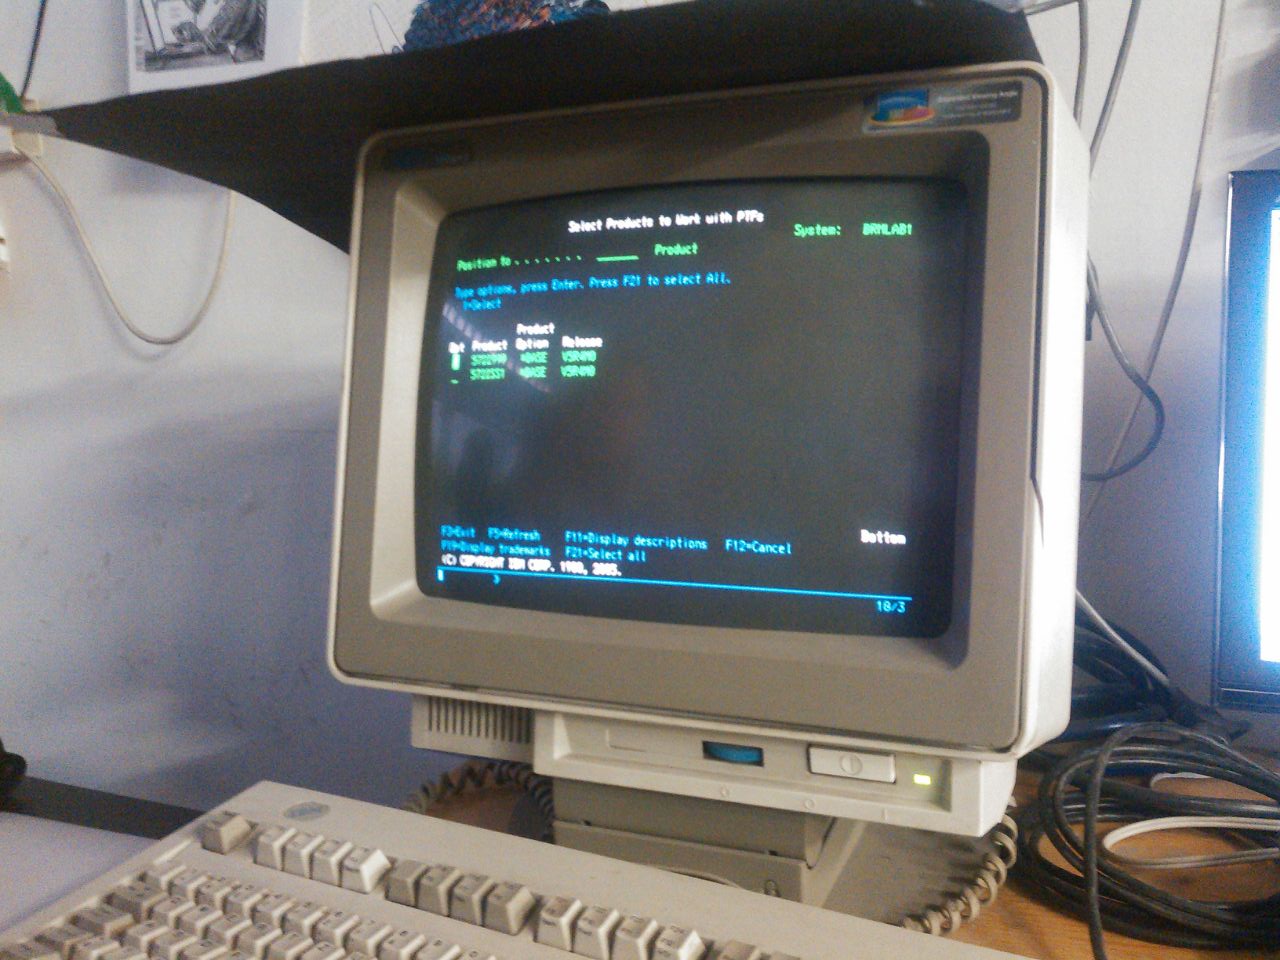 Terminal connected to the IBM AS/400